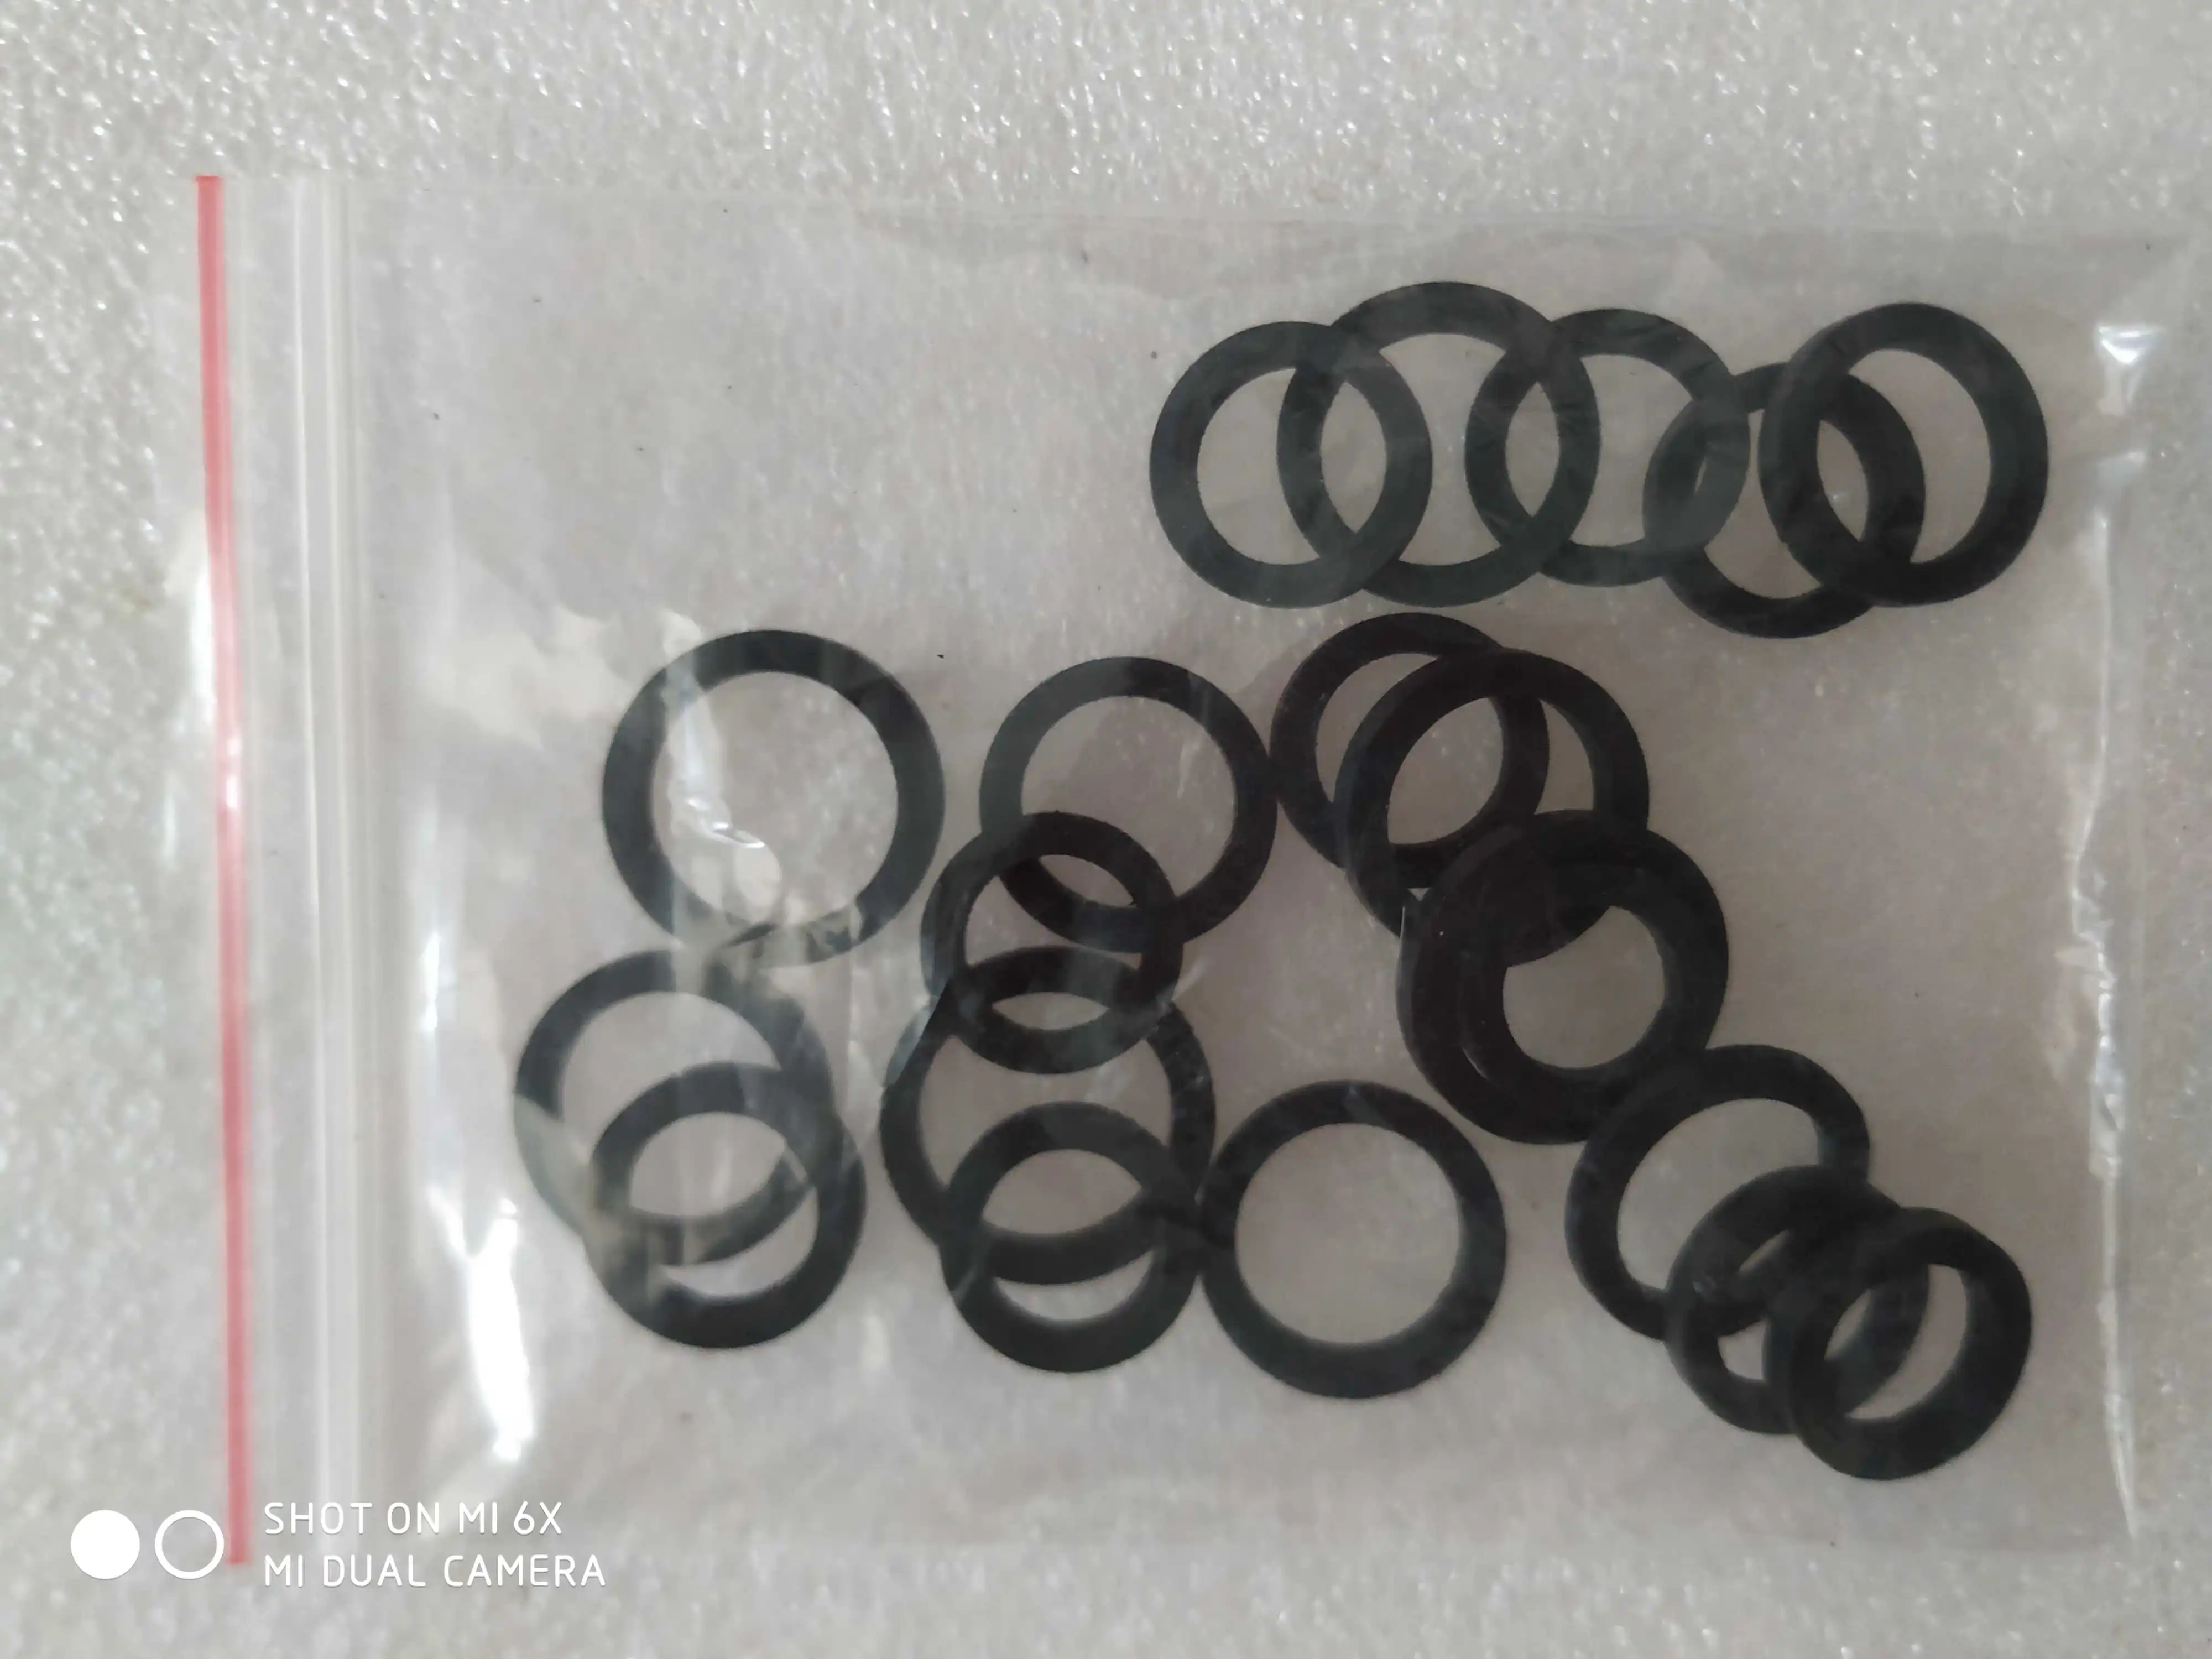 

20pcs Mixed Square 2mm Idle Tire Wheel Belt Loop Idler Rubber Ring for Cassette Deck Recorder Tape Stereo Audio Player